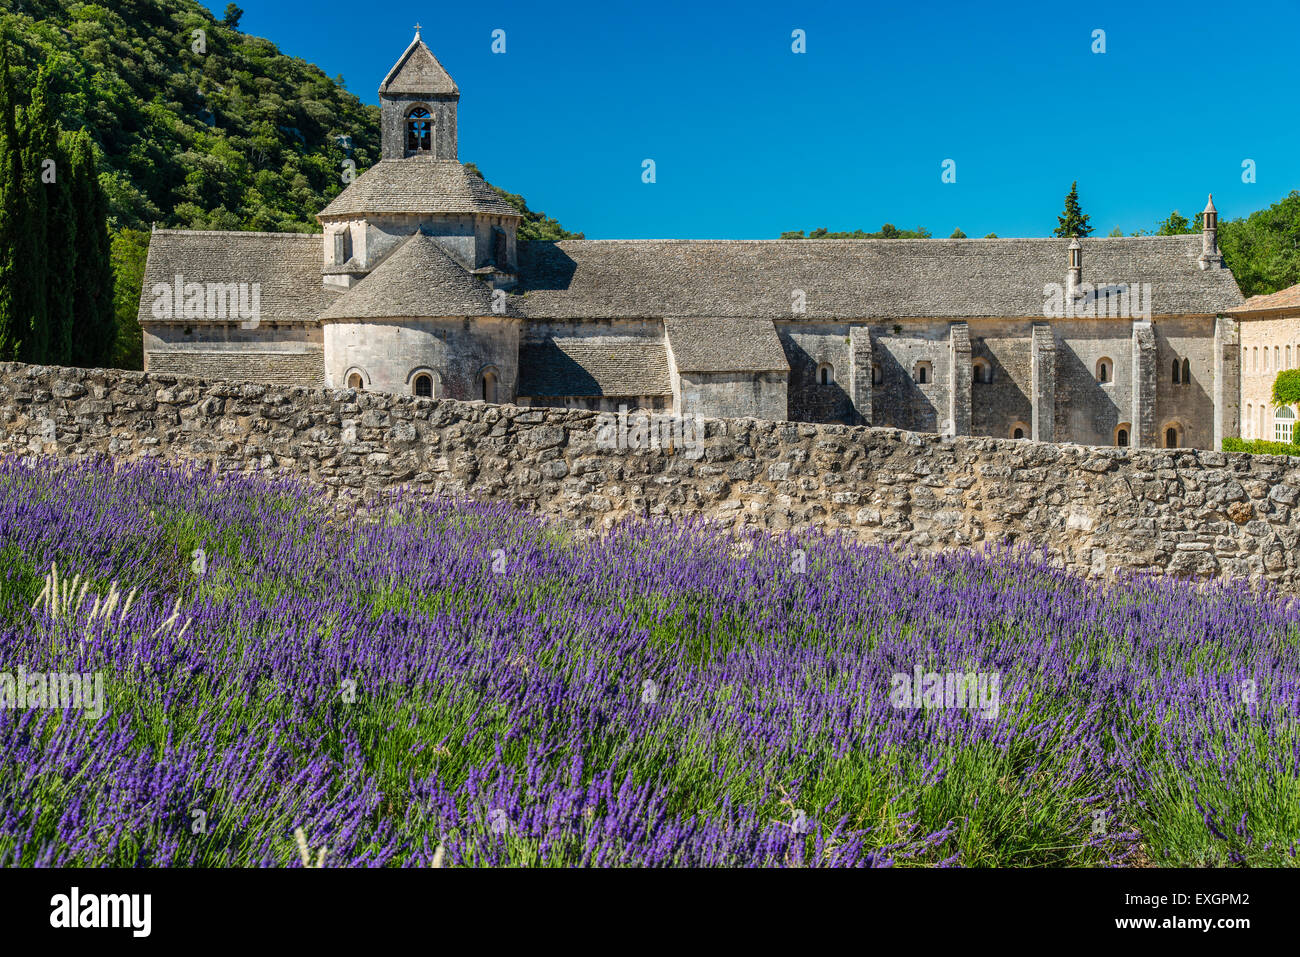 Senanque Abbey or Abbaye Notre-Dame de Senanque with lavender field in bloom, Gordes, Provence, France Stock Photo